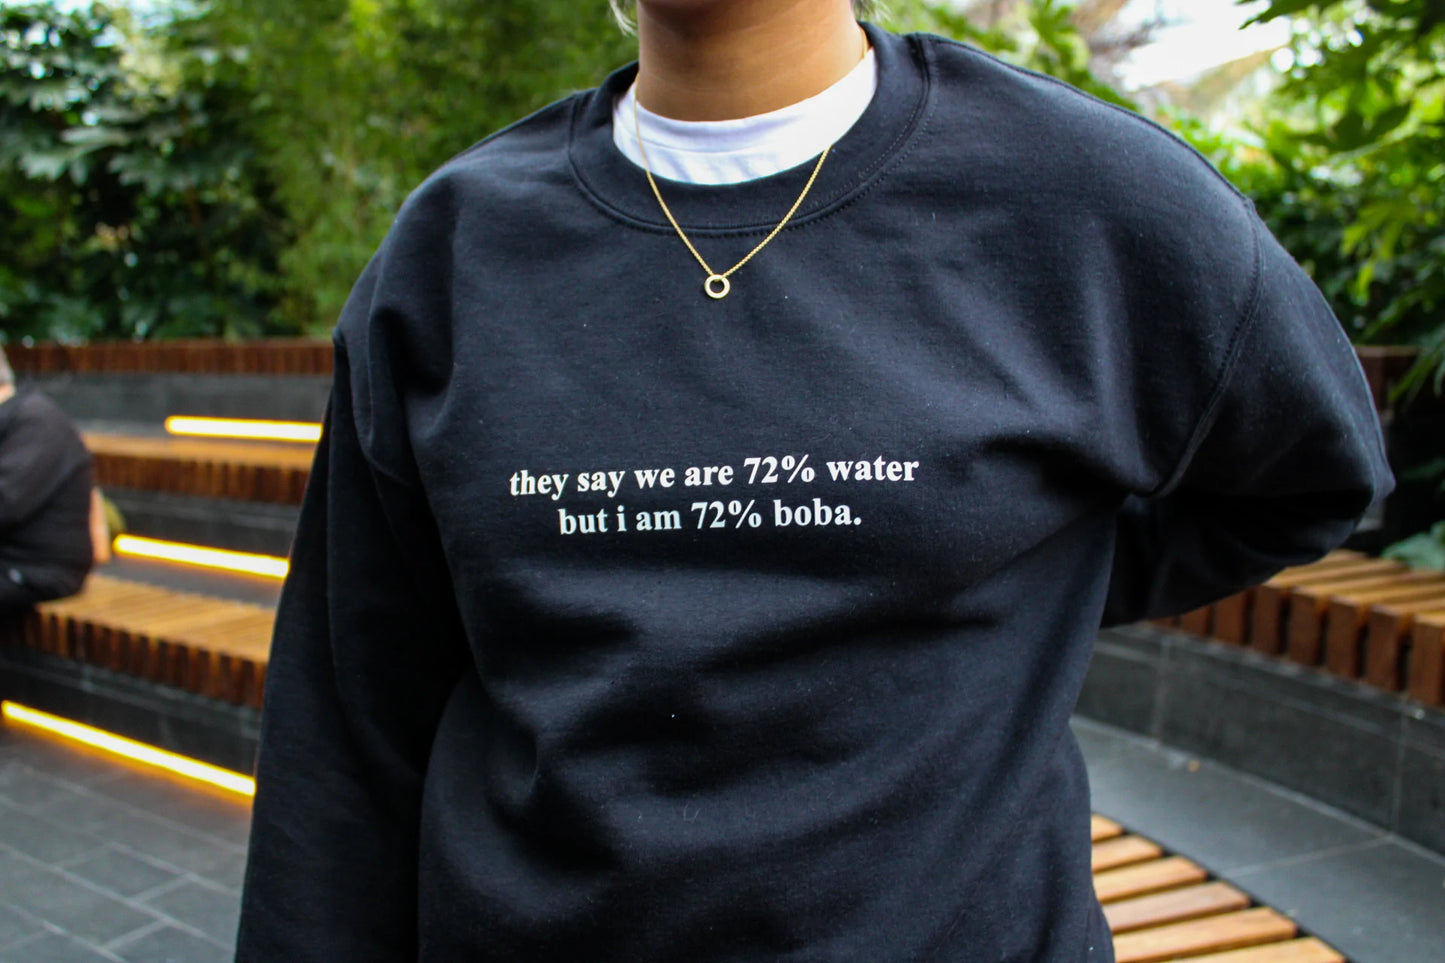 they say we are 72% water but i am 72% boba | sweathshirt pre-order